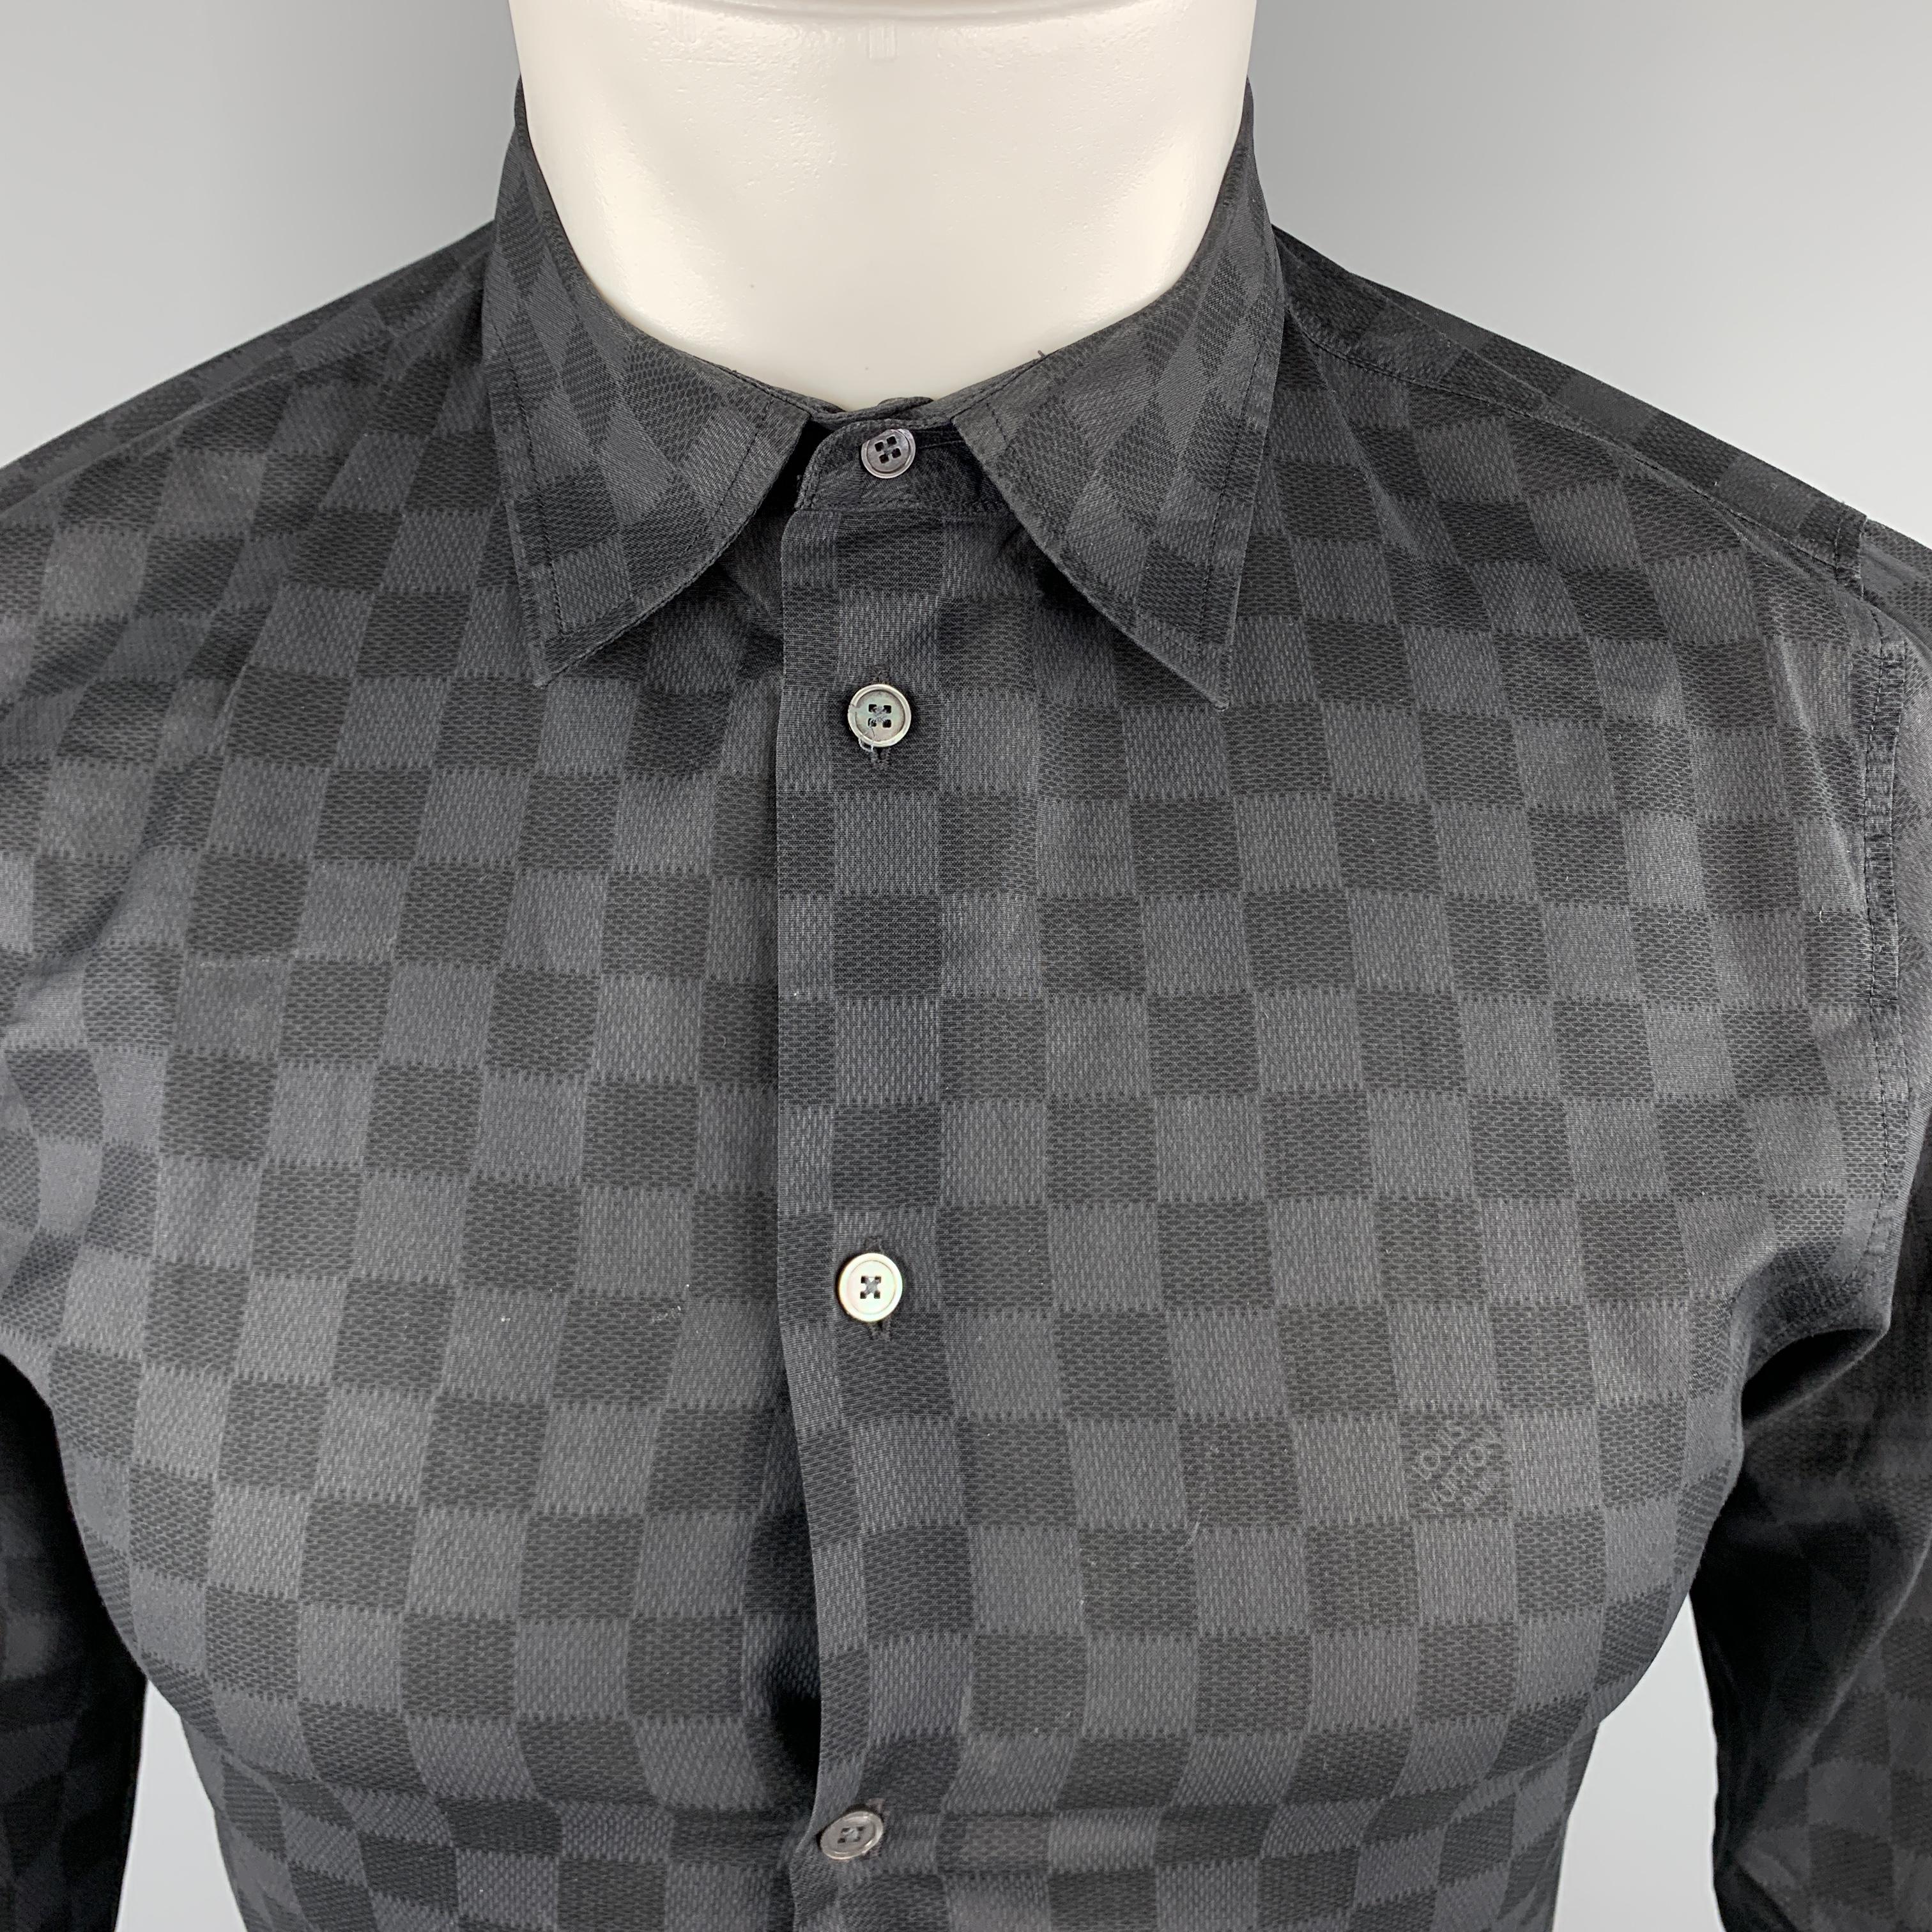 LOUIS VUITTON Long Sleeve Shirt comes in gray and black tones in a damier print light cotton material, with a classic collar, buttoned cuffs, button up. As is. Made in France. 

Very Good Pre-Owned Condition.
Marked: S

Measurements:

Shoulder: 14.5